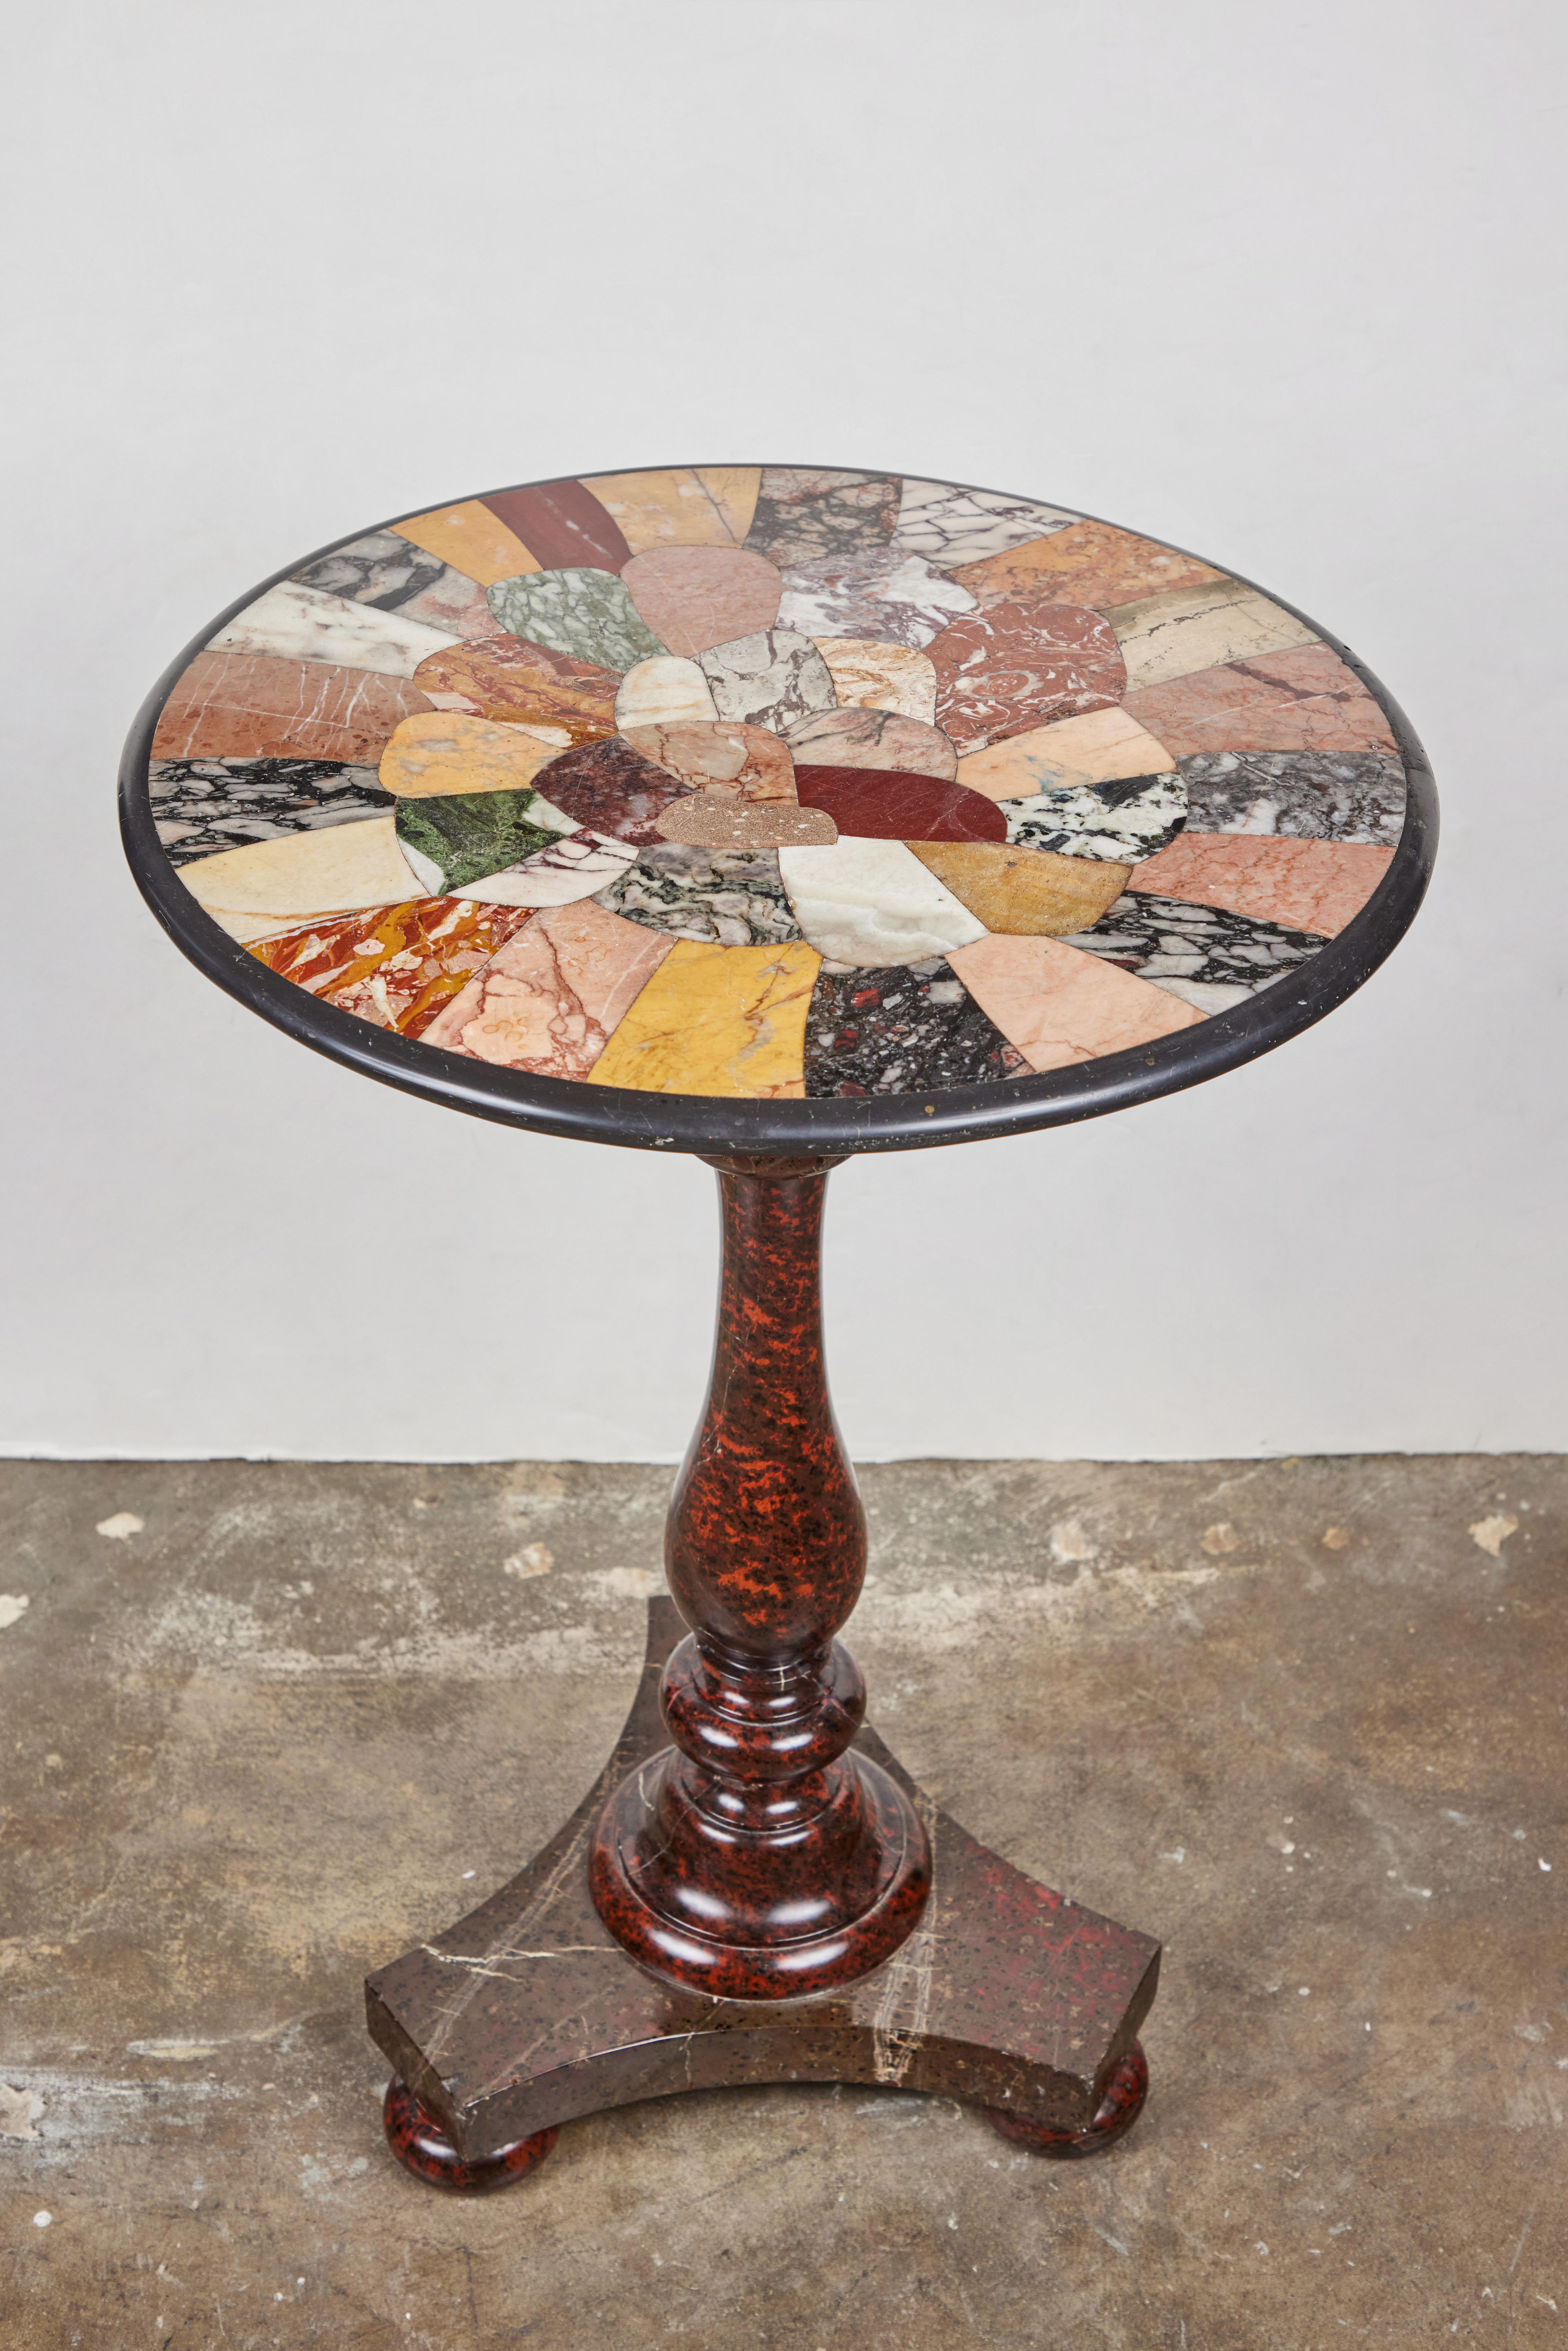 A. c 1860, Italian, hand-carved and polished, solid marble pedestal table. The vibrant, specimen top above a turned center column on a tripod base with bun feet.